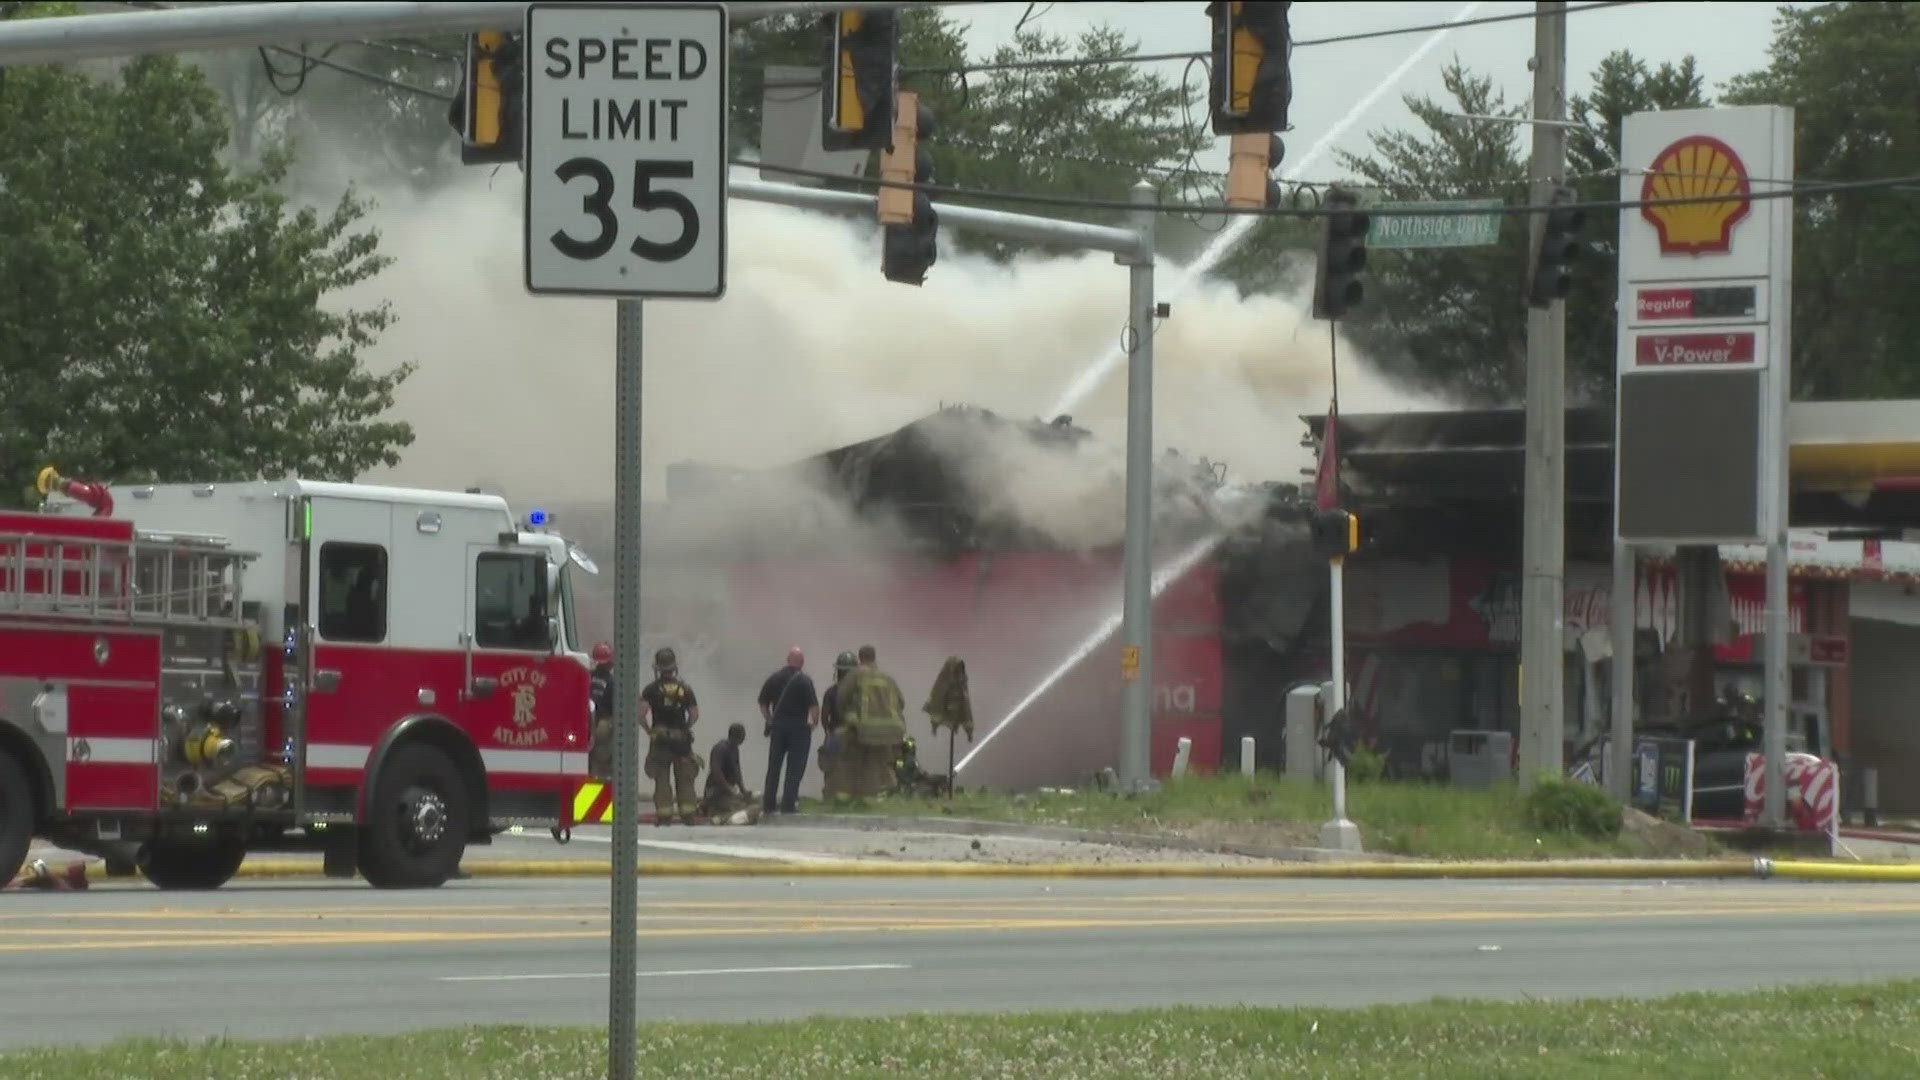 11Alive SkyTracker flew over a Shell gas station along Northside Drive, where heavy smoke was seen as firefighters worked to extinguish the flames.